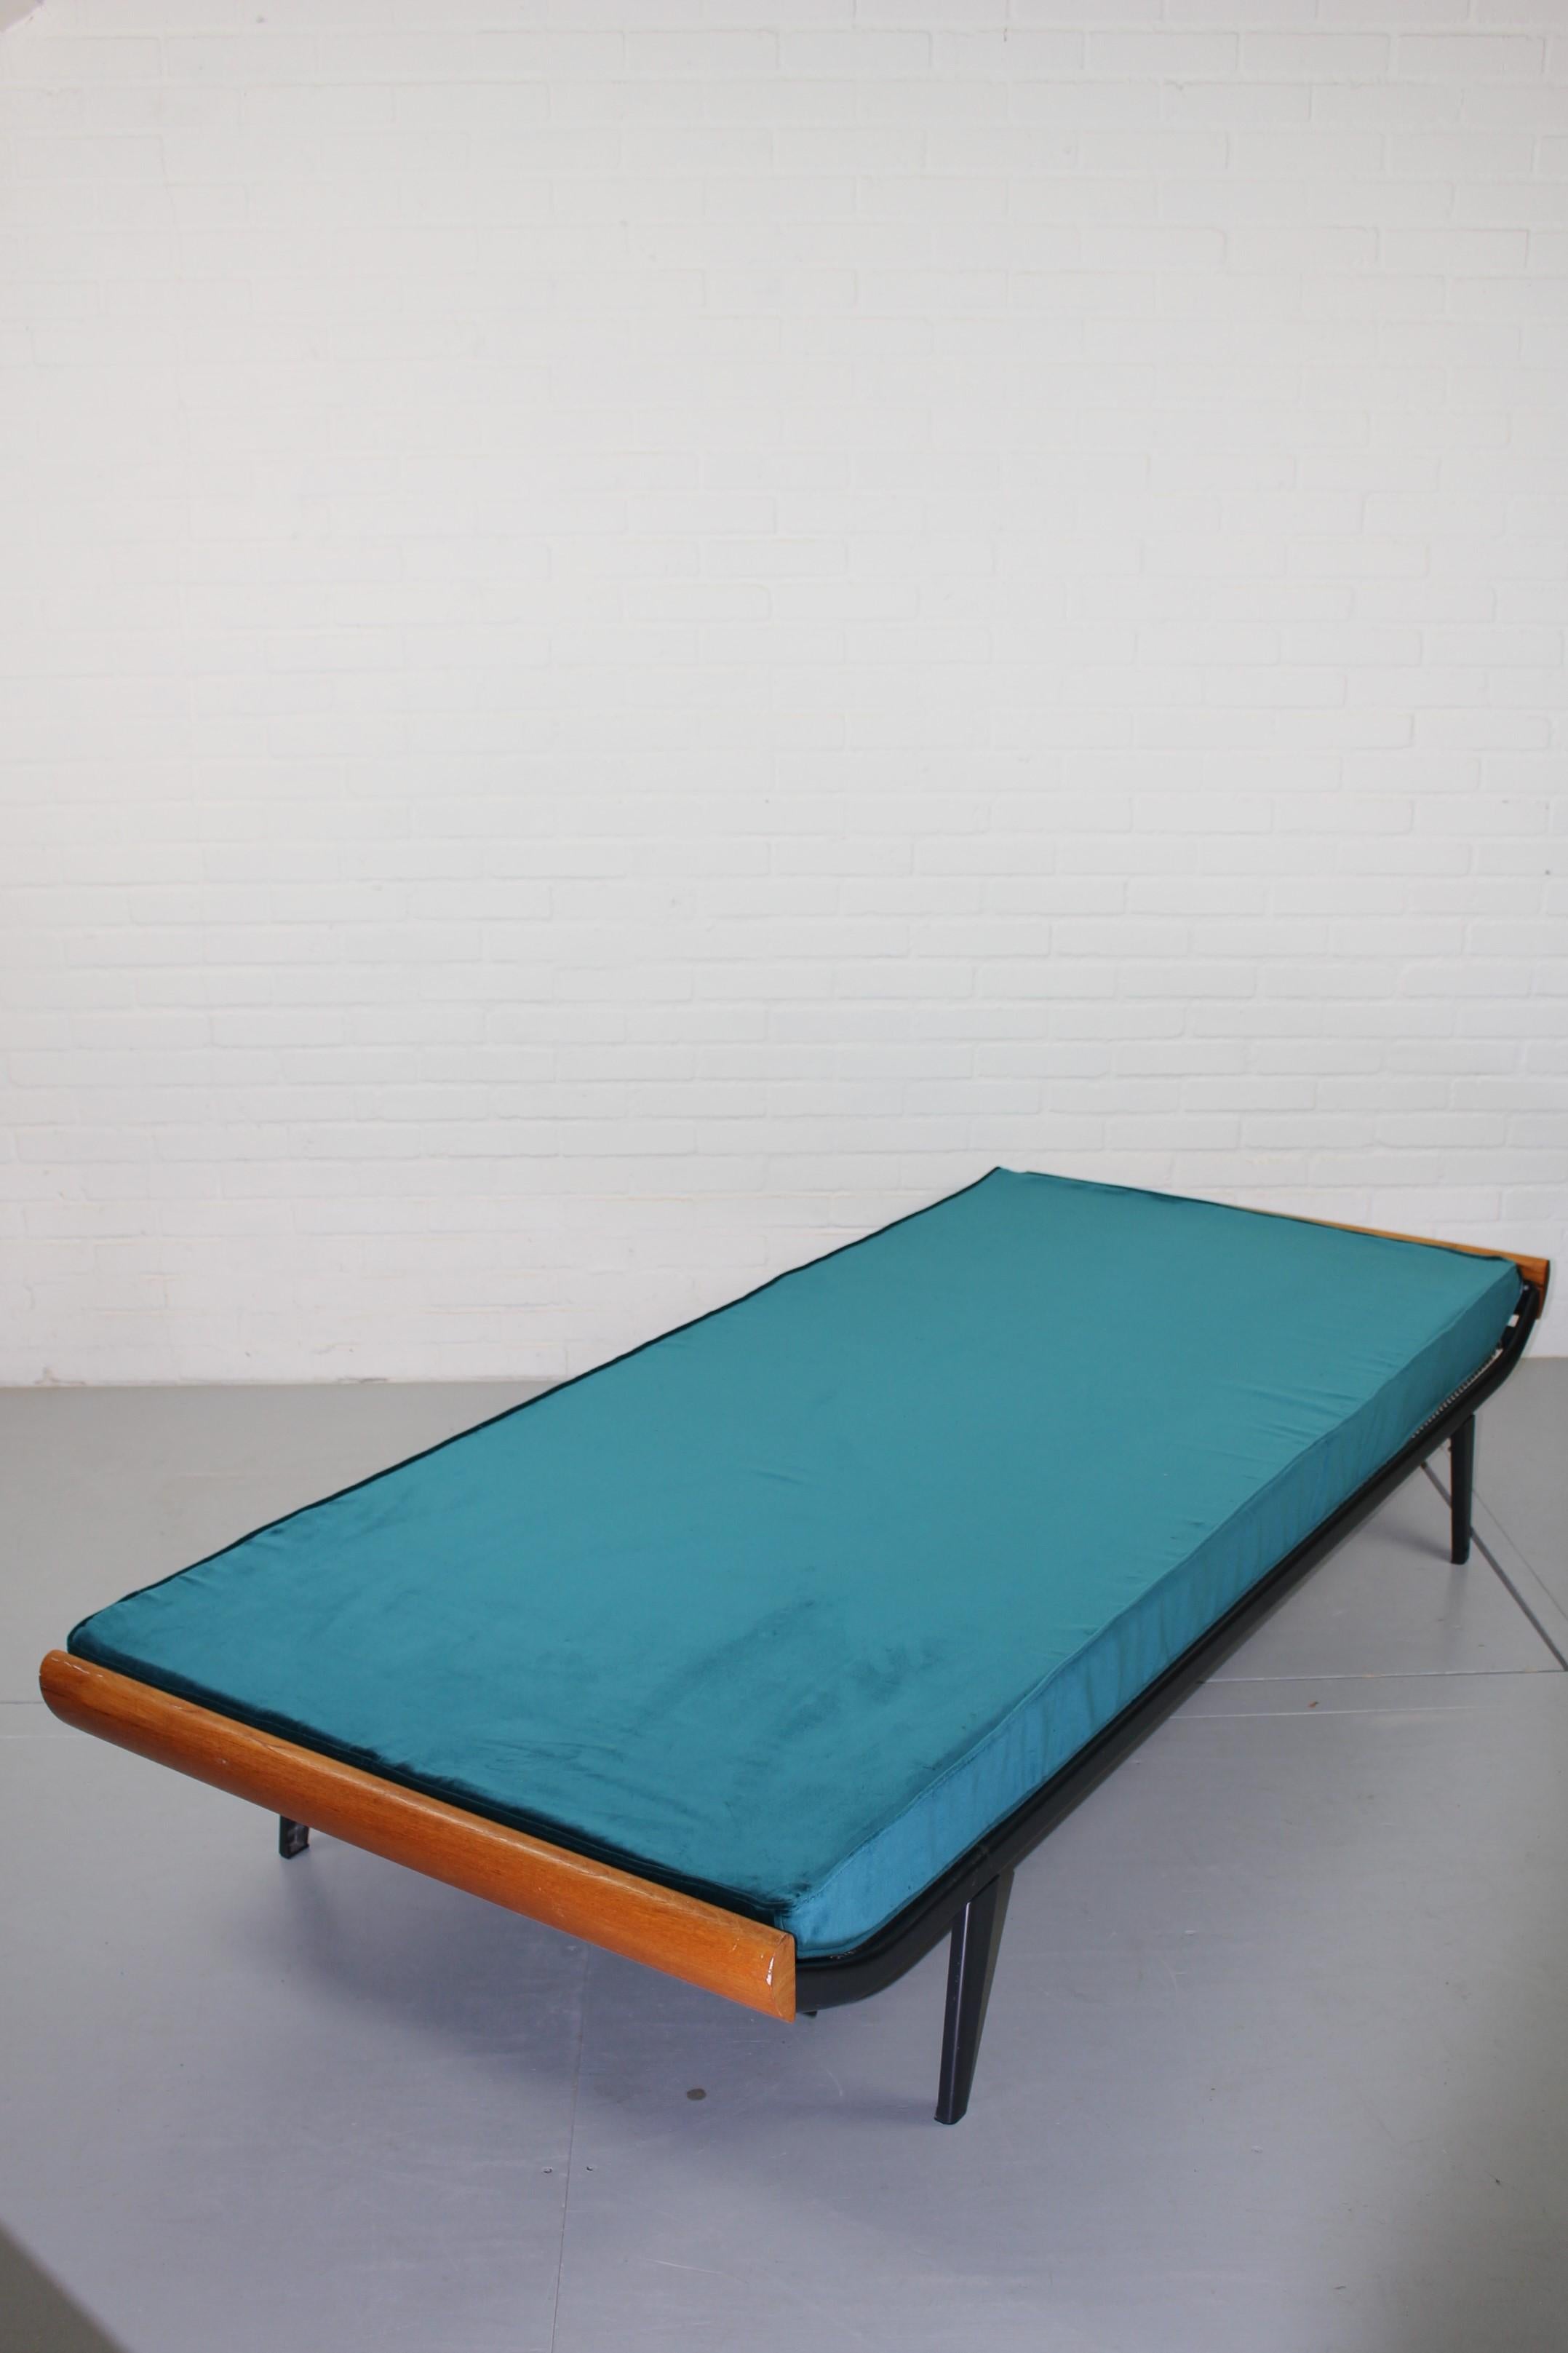 This Cleopatra bed was designed by Dick Cordemeijer for Auping in Holland, 1954. The frame was made from very dark grey coated metal with solid teak wooden tops. The new mattress has a new velours blue fabric.